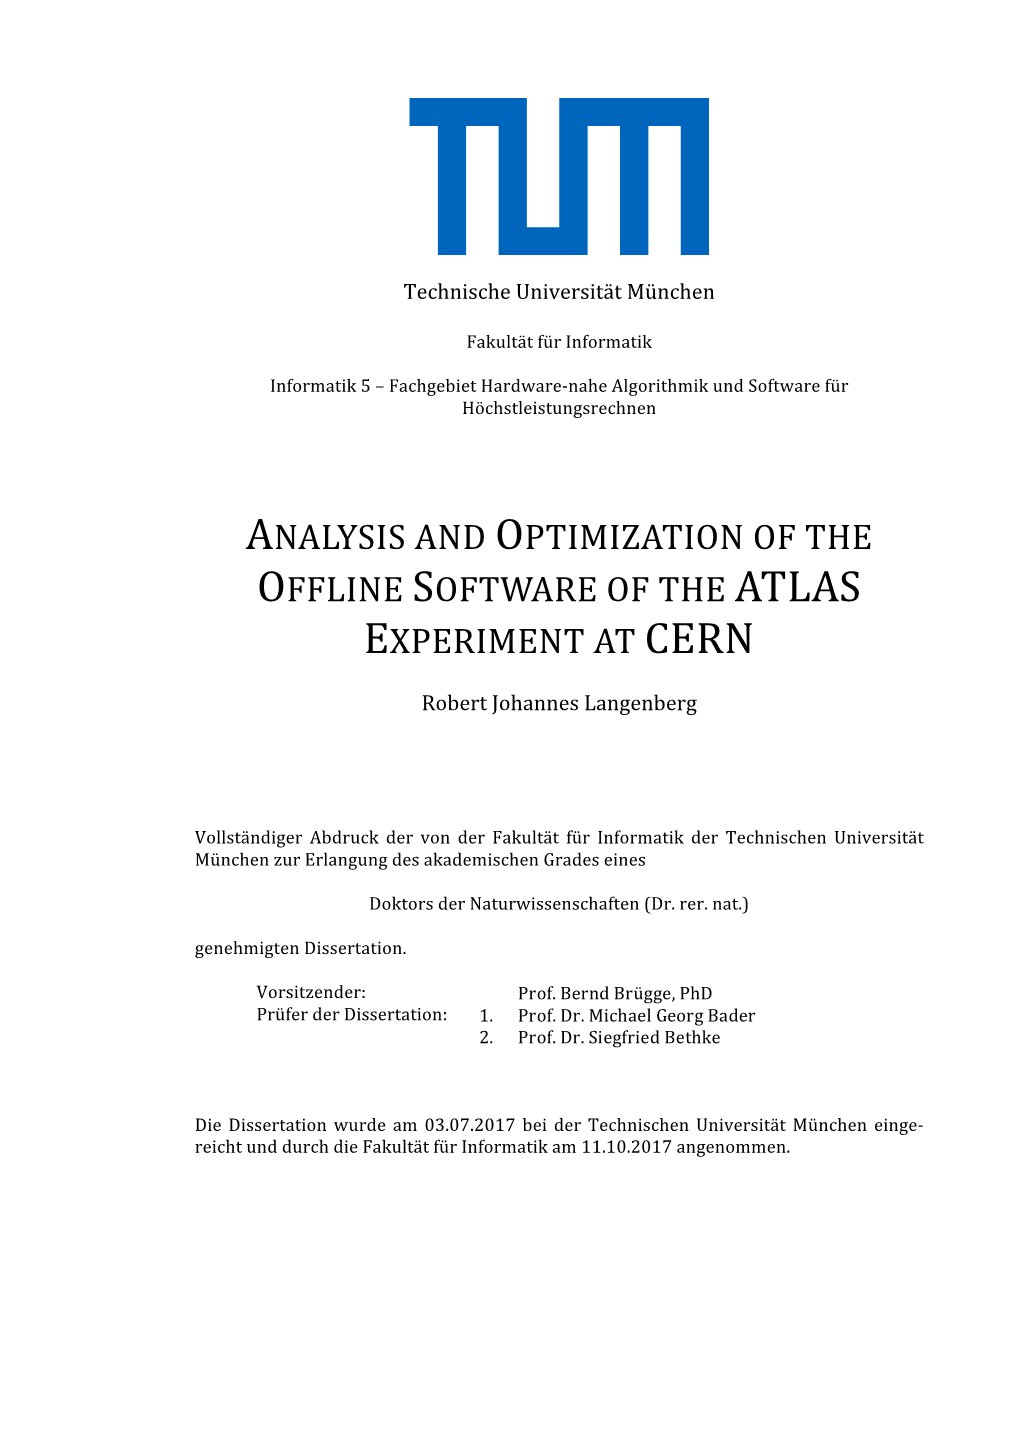 Analysis and Optimization of the Offline Software of the Atlas Experiment at Cern